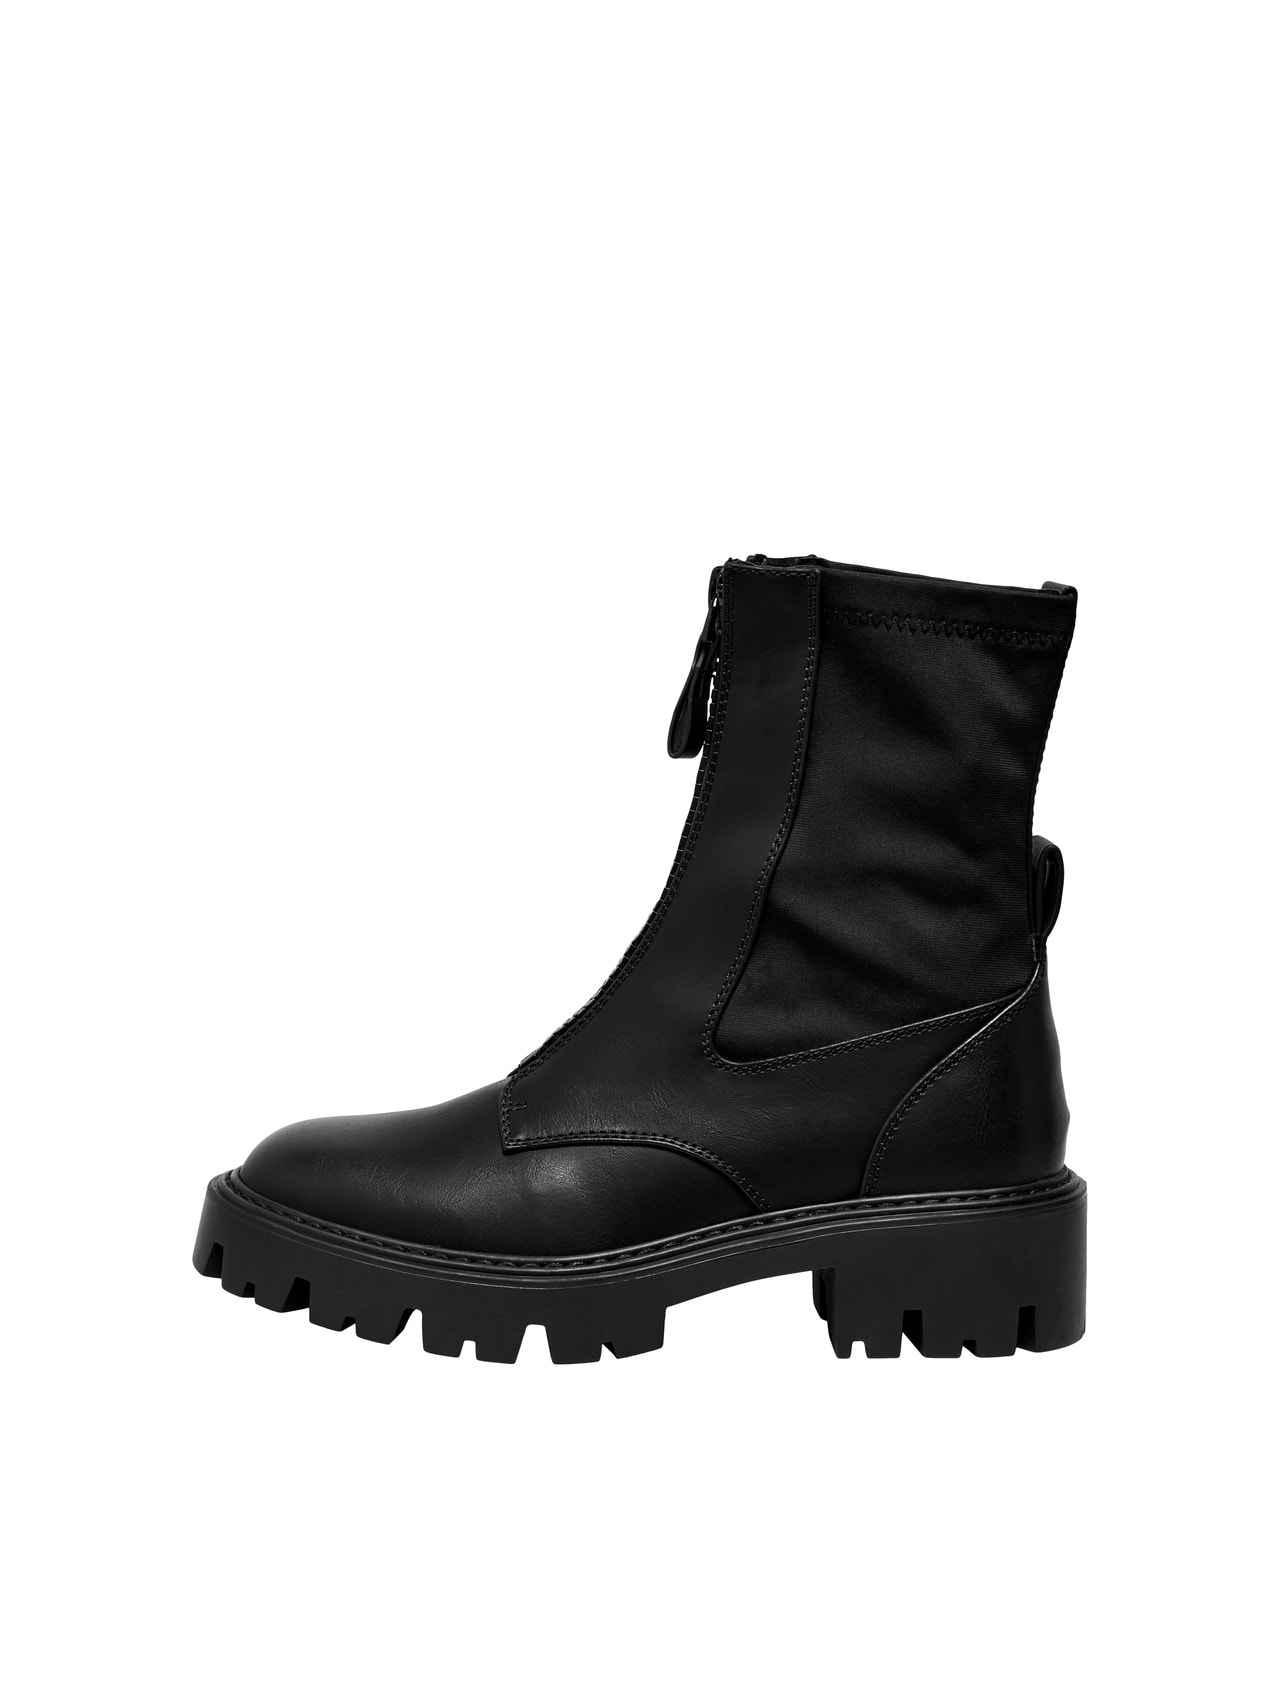 ONLY Almond toe Boots -Black - 15304867